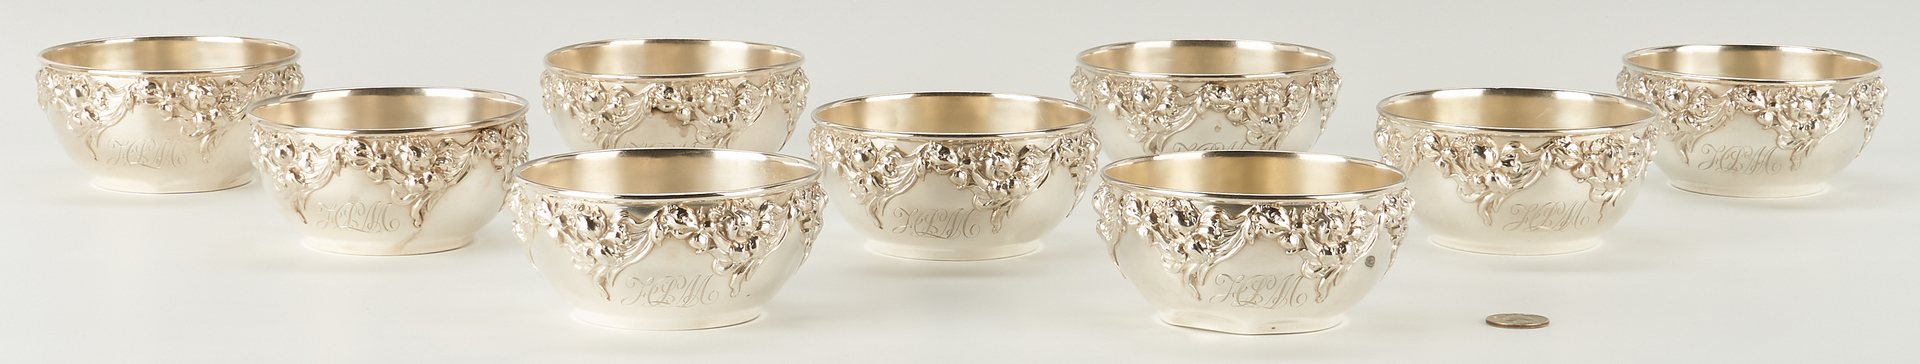 Lot 285: Set of 9 Wallace Sterling Silver Repousse Bowls